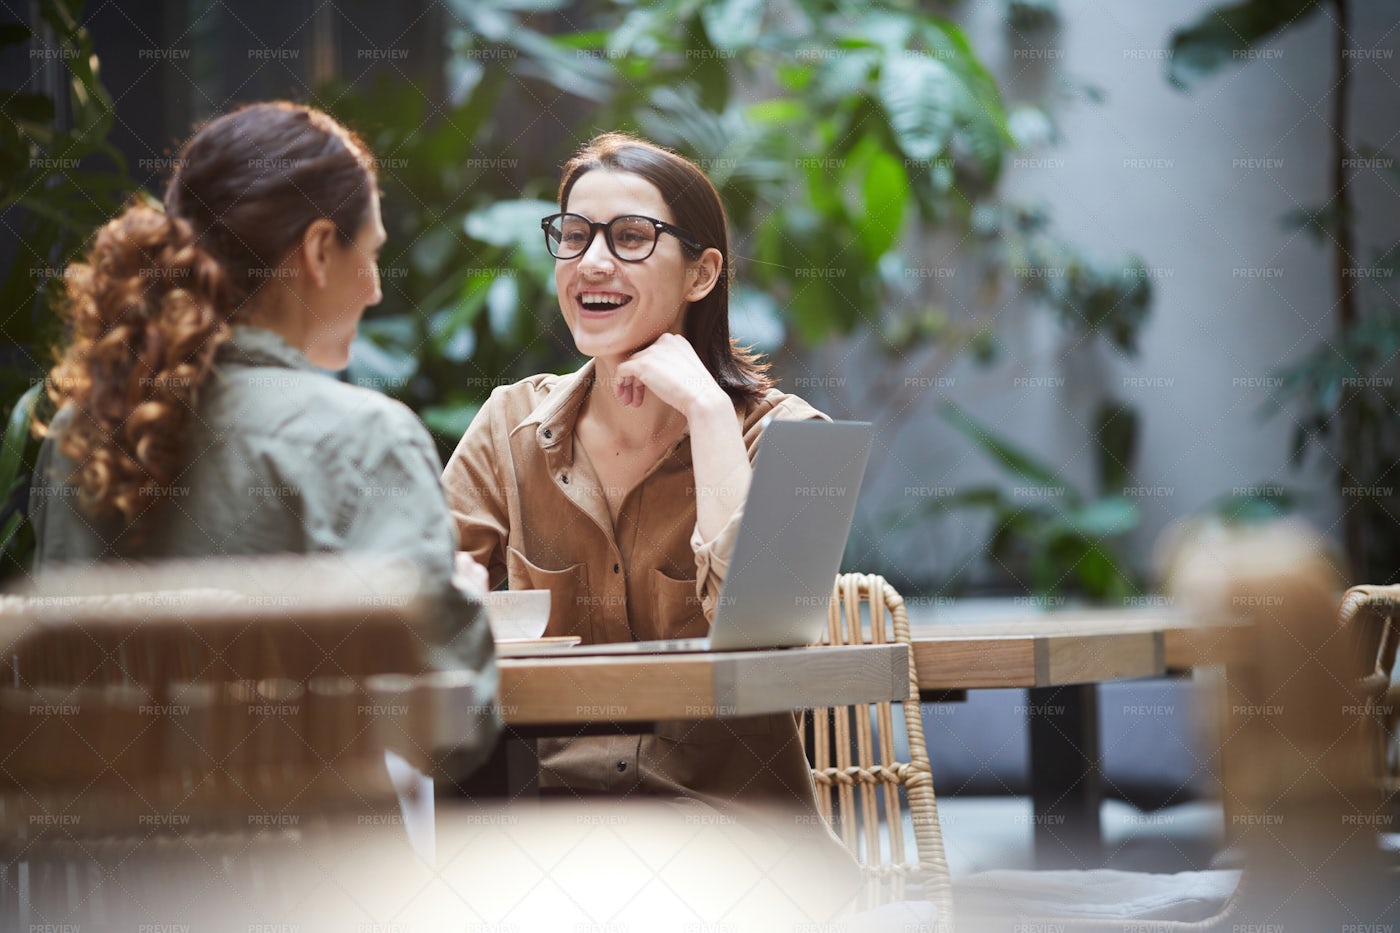 Woman Laughing During Lunch With...: Stock Photos